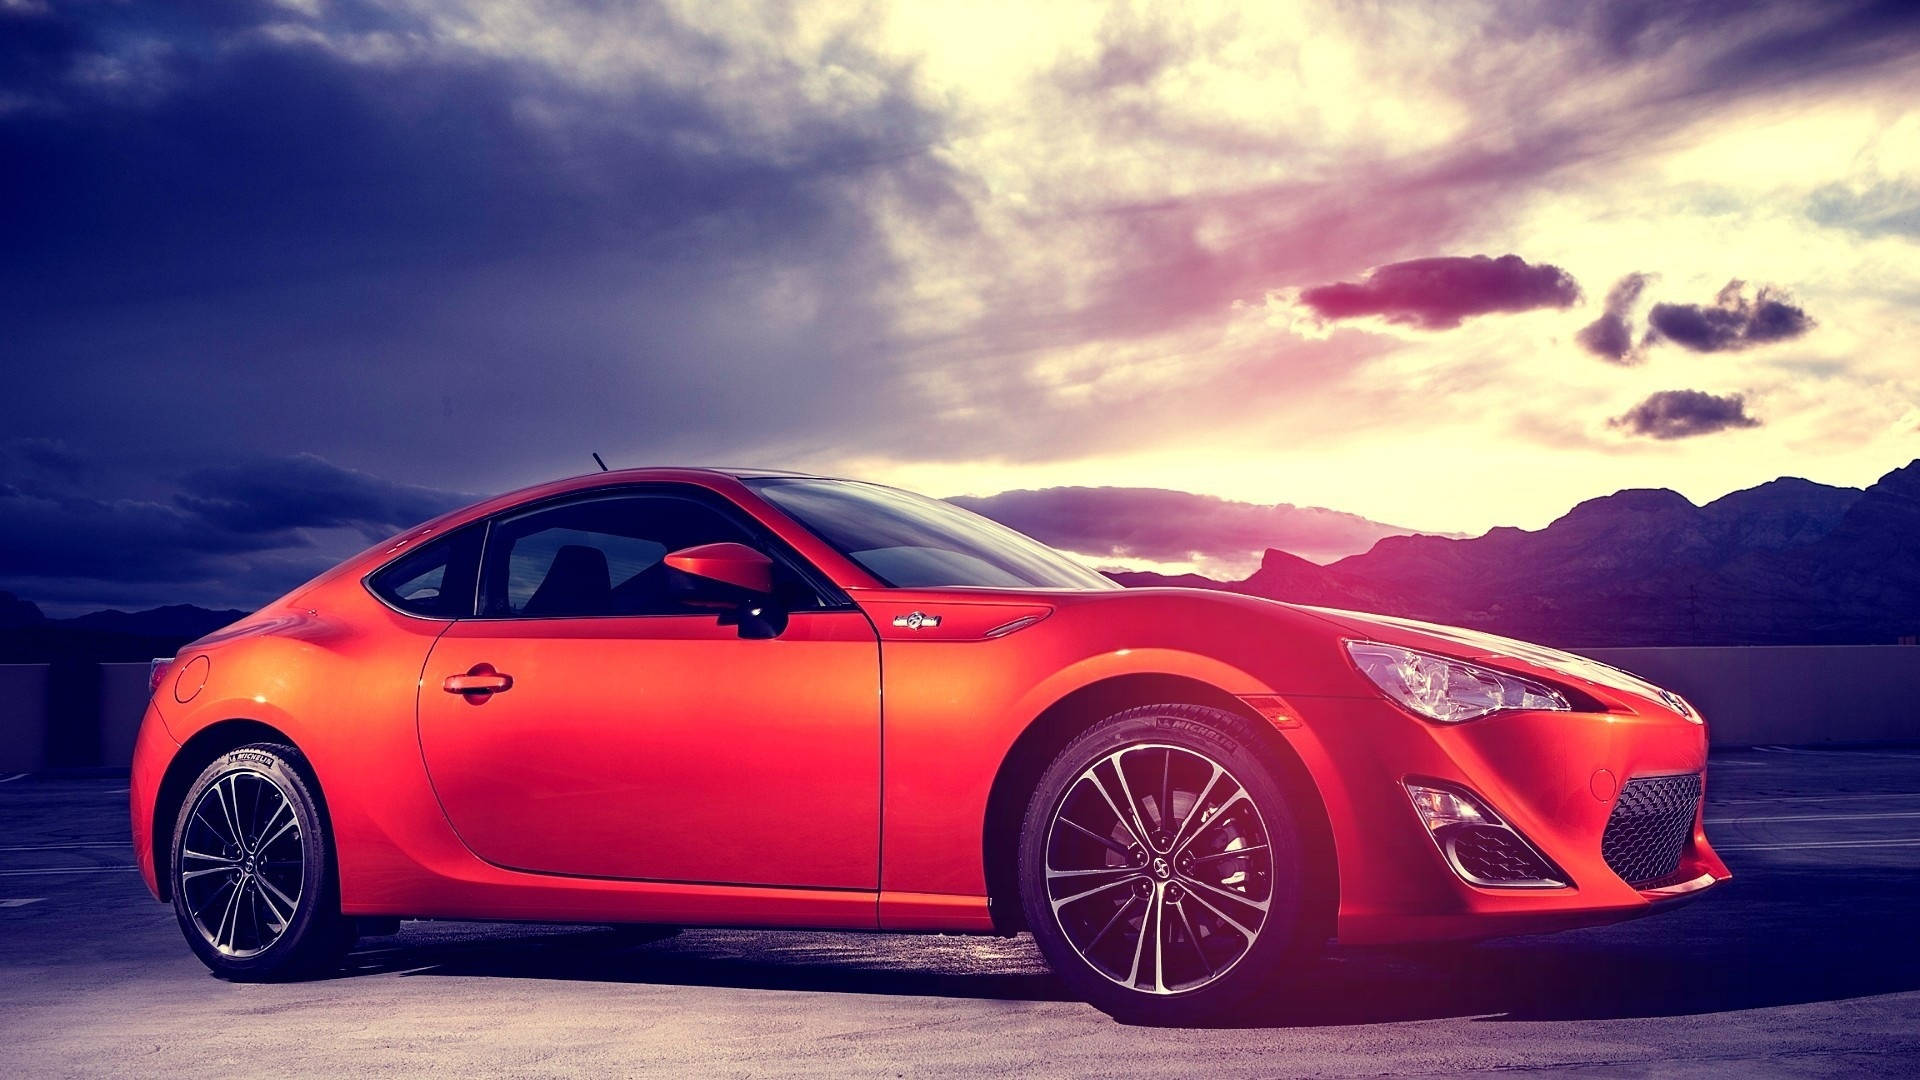 Brz On A Cloudy Day Wallpaper